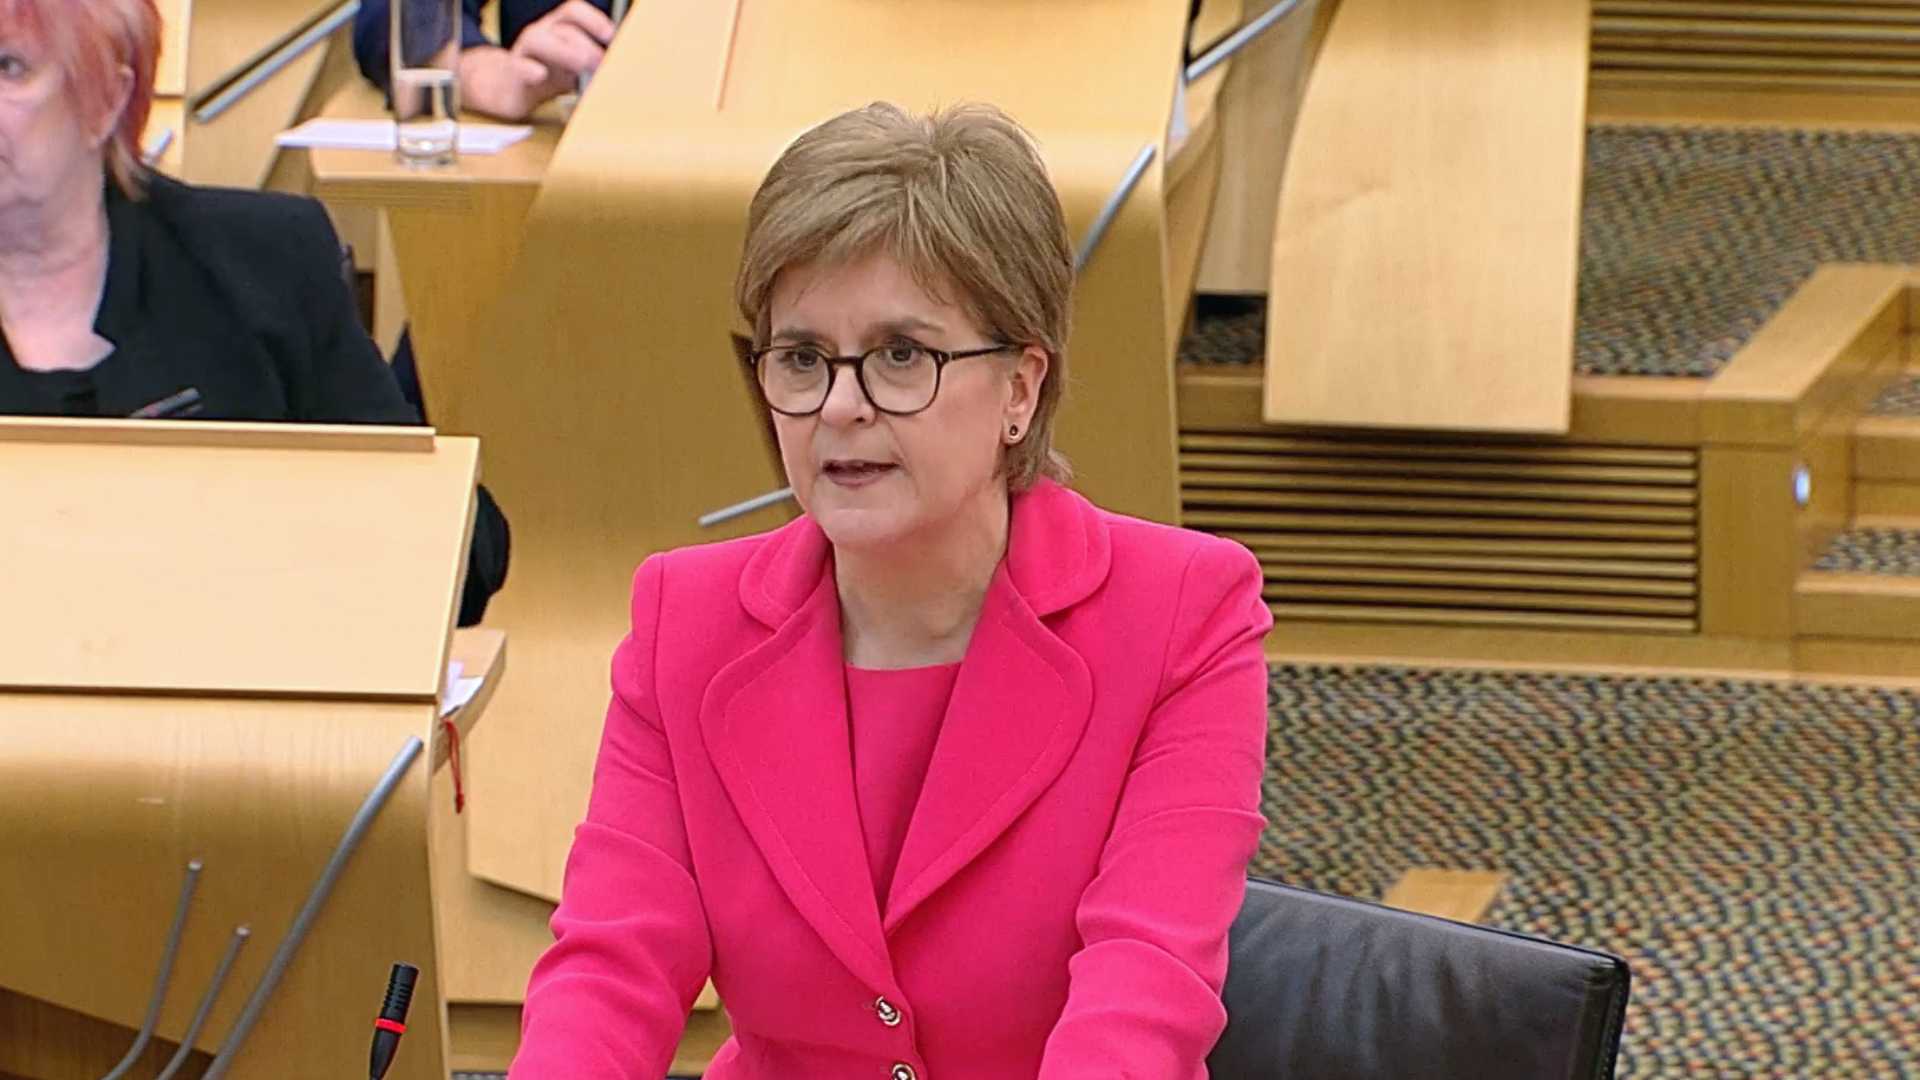 Nicola Sturgeon was responding to a statement from one of the victims of Isla Bryson, a transwoman formerly known as Adam Graham.